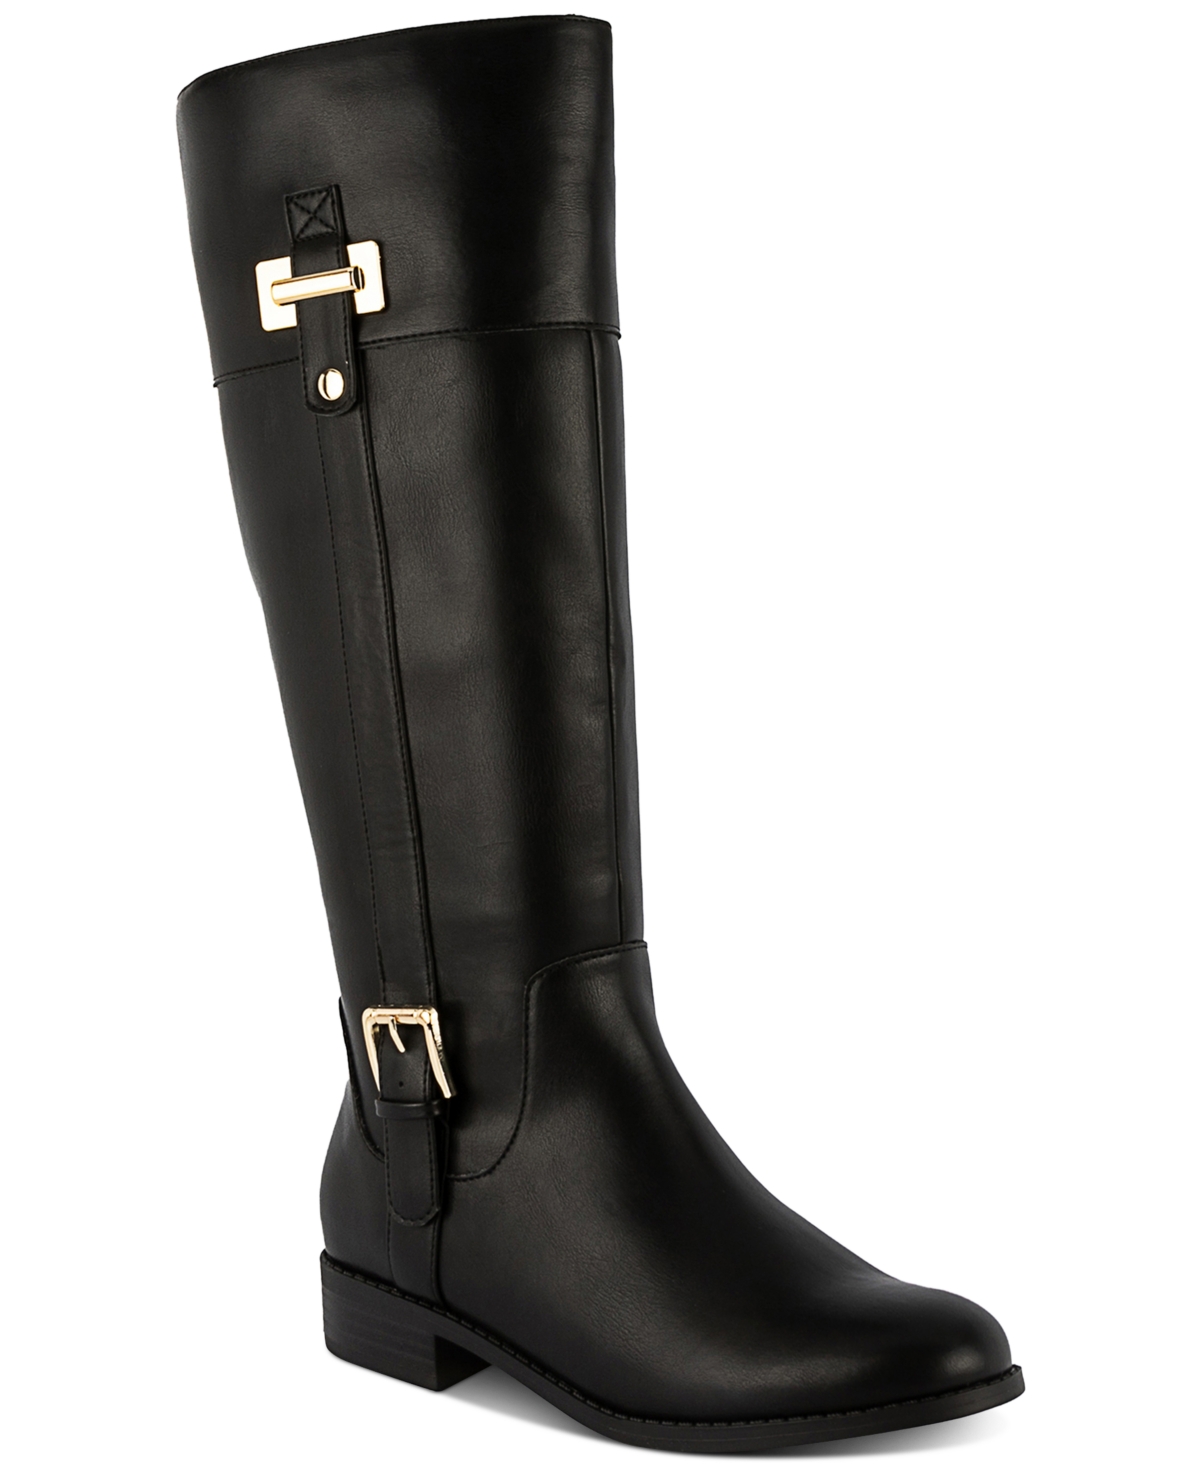 Women's Edenn Buckled Wide-Calf Riding Boots, Created for Macy's - Black Cognac